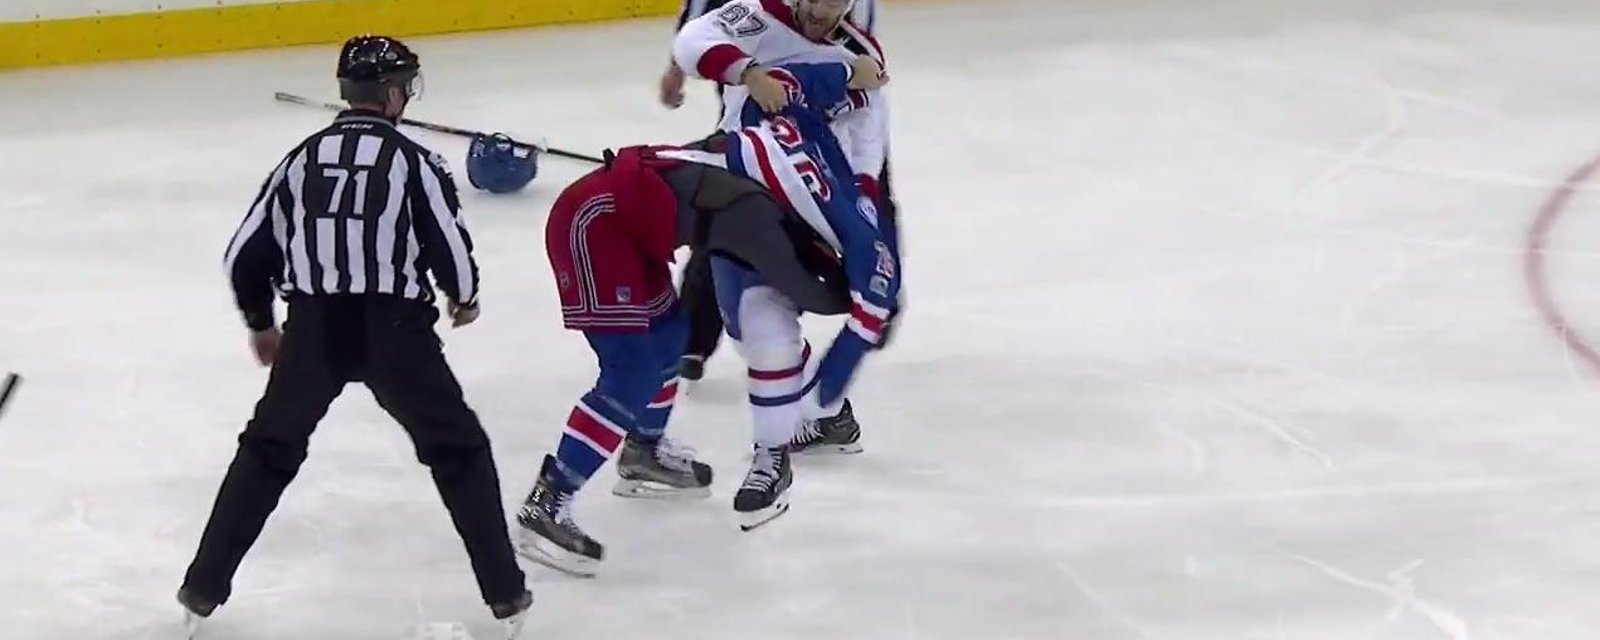 Jimmy Vesey doesn't step back, drops the gloves against captain Pacioretty. 